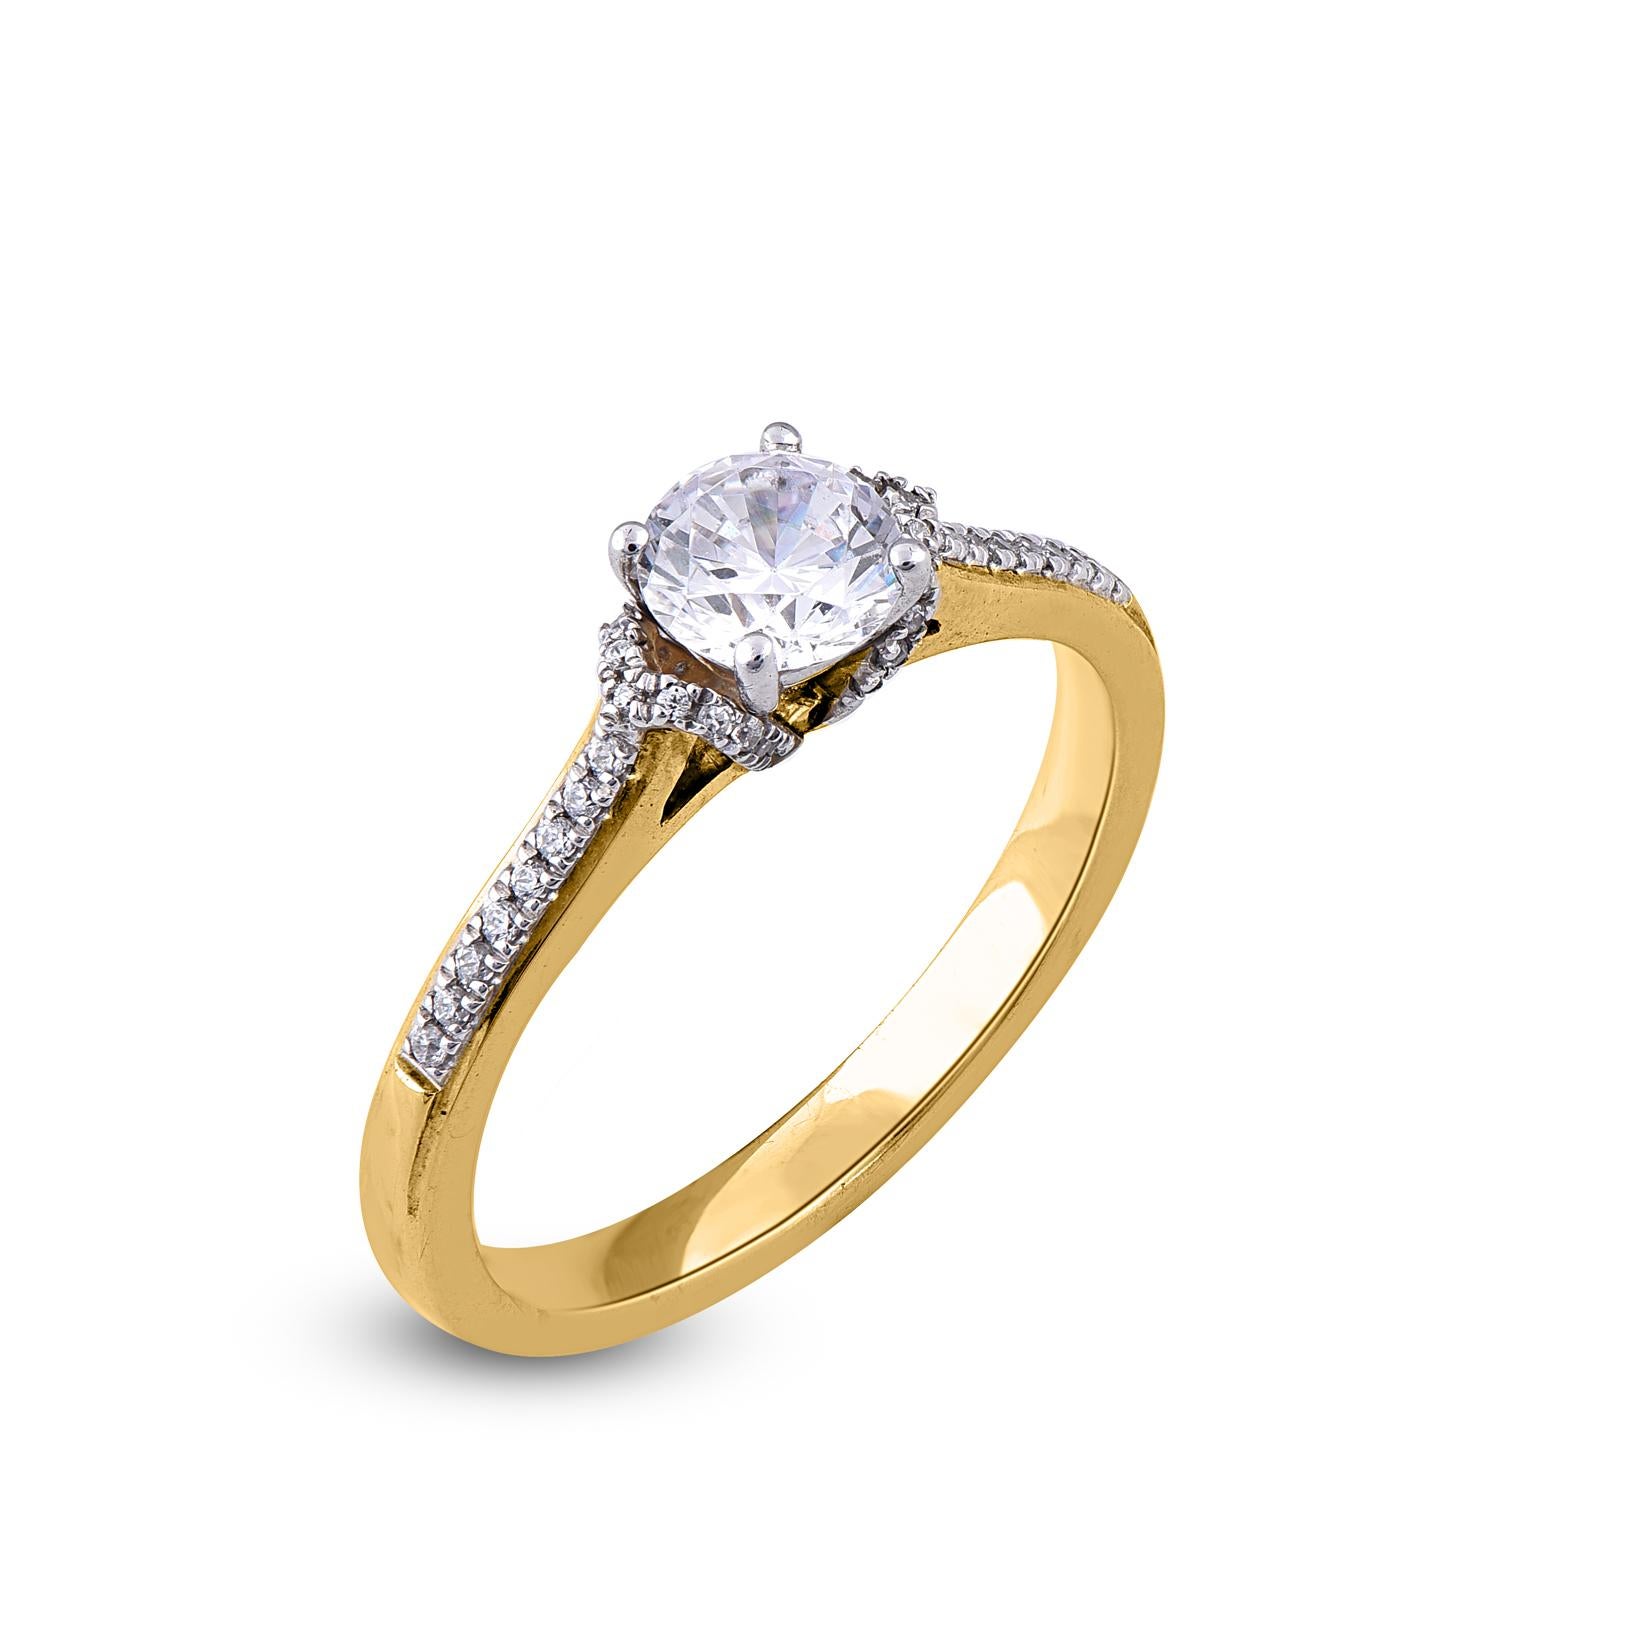 Ask her to be yours with this dazzling bridal halo ring which adds a touch to sophistication to your style with this 18 Karat Yellow Gold. This ring features 0.55 ct of center stone and 0.10 ct of 38 Round White Diamonds lined on shank set in Prong